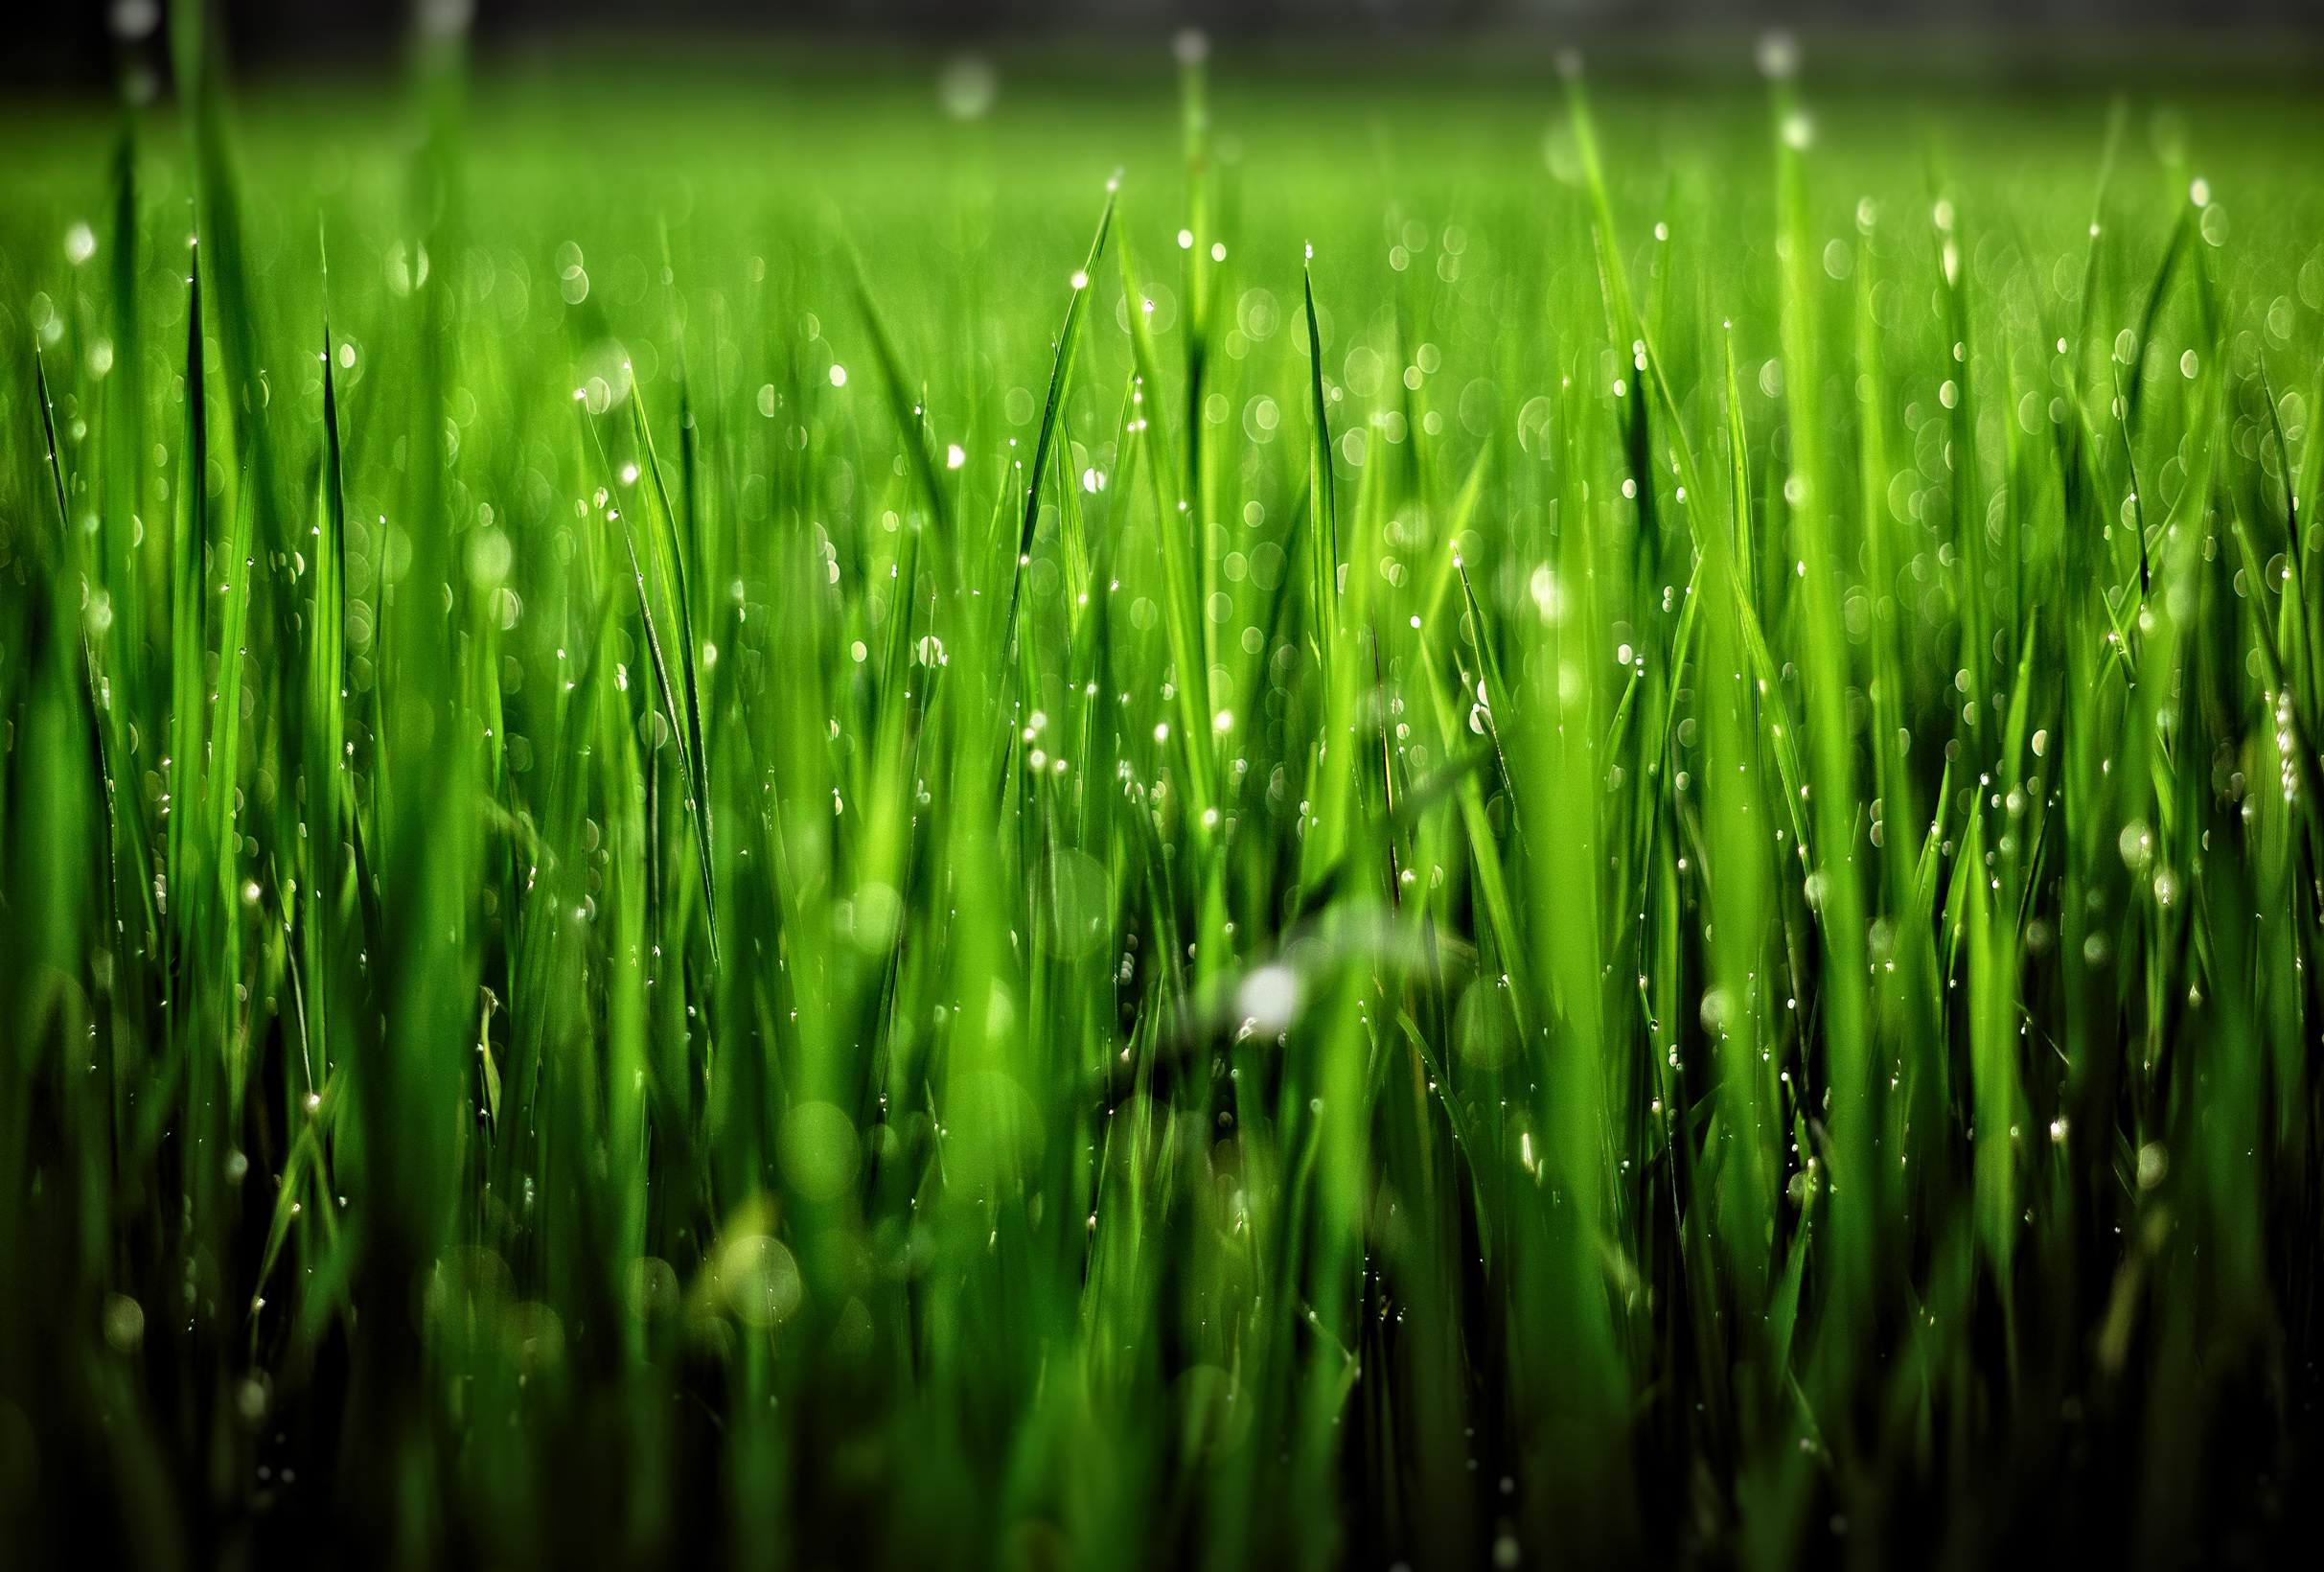 Grass with droplets - shallow focus photo